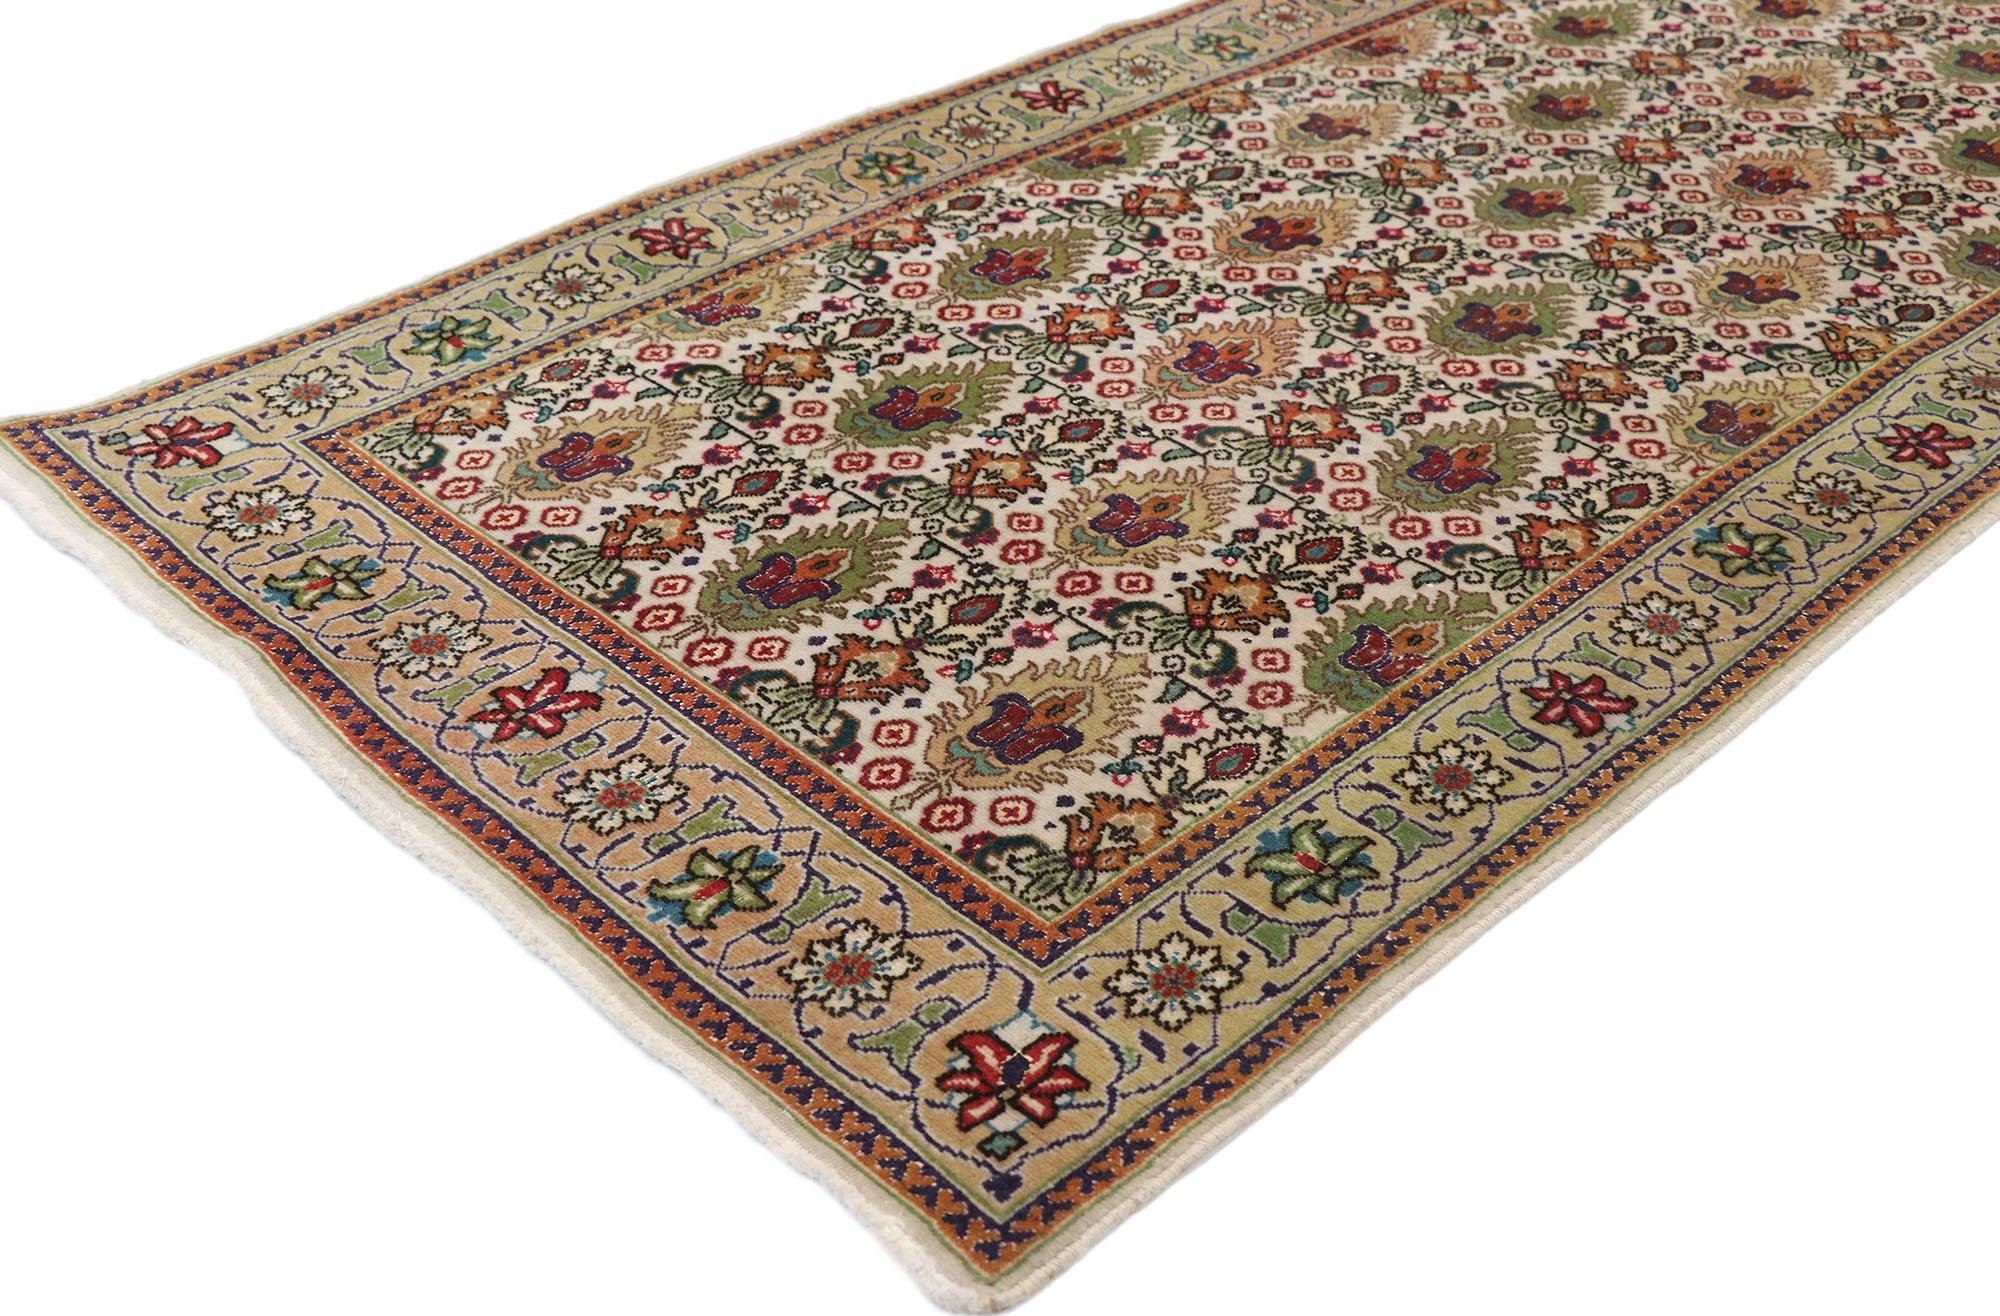 77637-77638, matching pair of antique Persian Tabriz Runners with Arts &Crafts style. Reminisce of 19th century French designs and decorative elegance, this matching pair of hand knotted wool antique Persian Tabriz runners beautifully embodies Arts